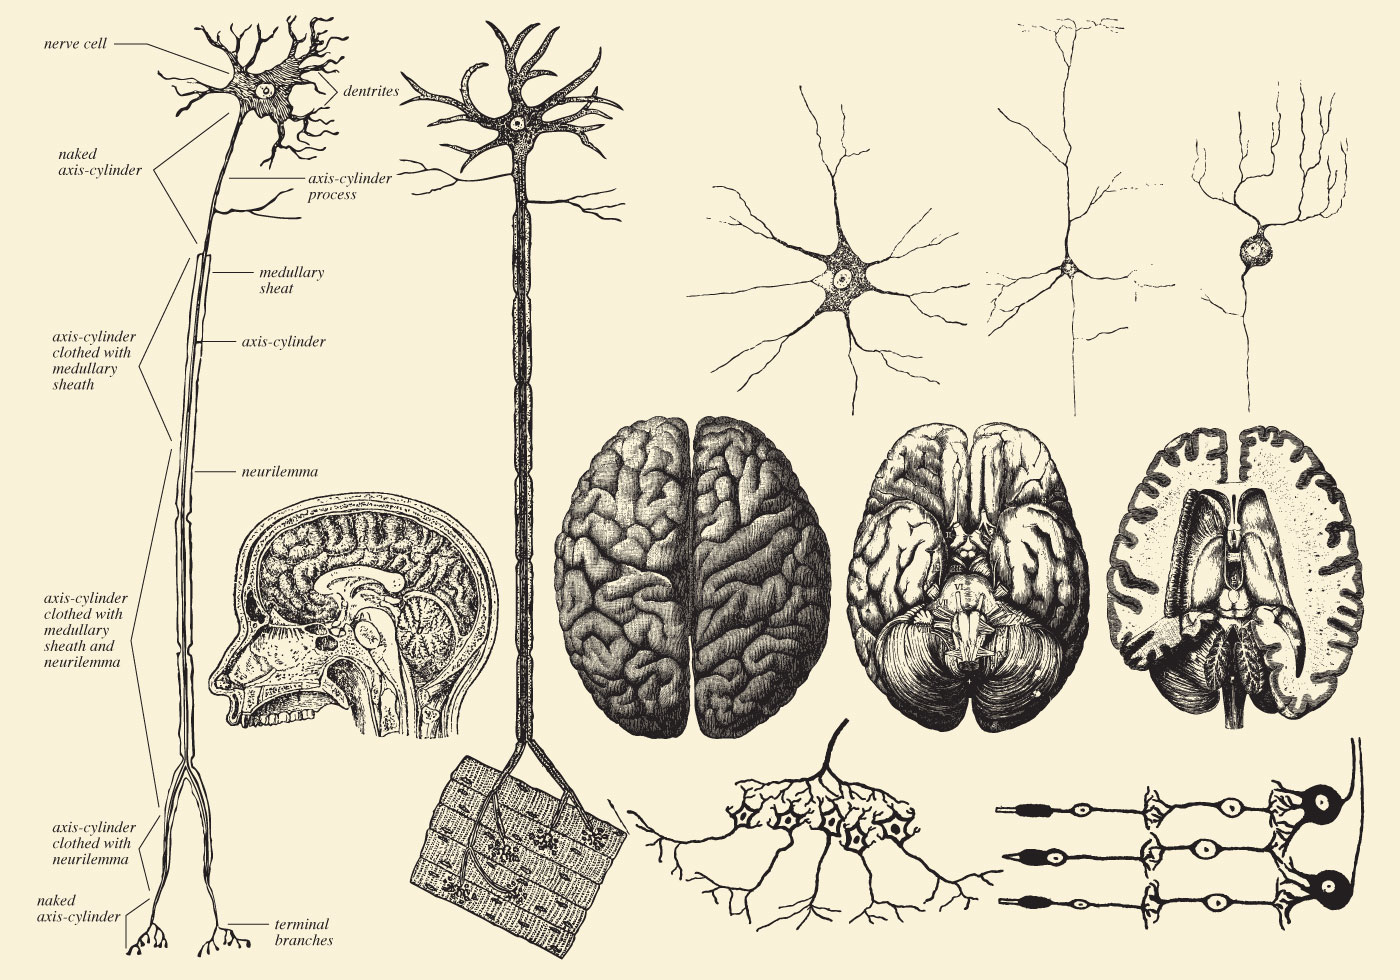 Brain And Neuron Drawings - Download Free Vector Art ...